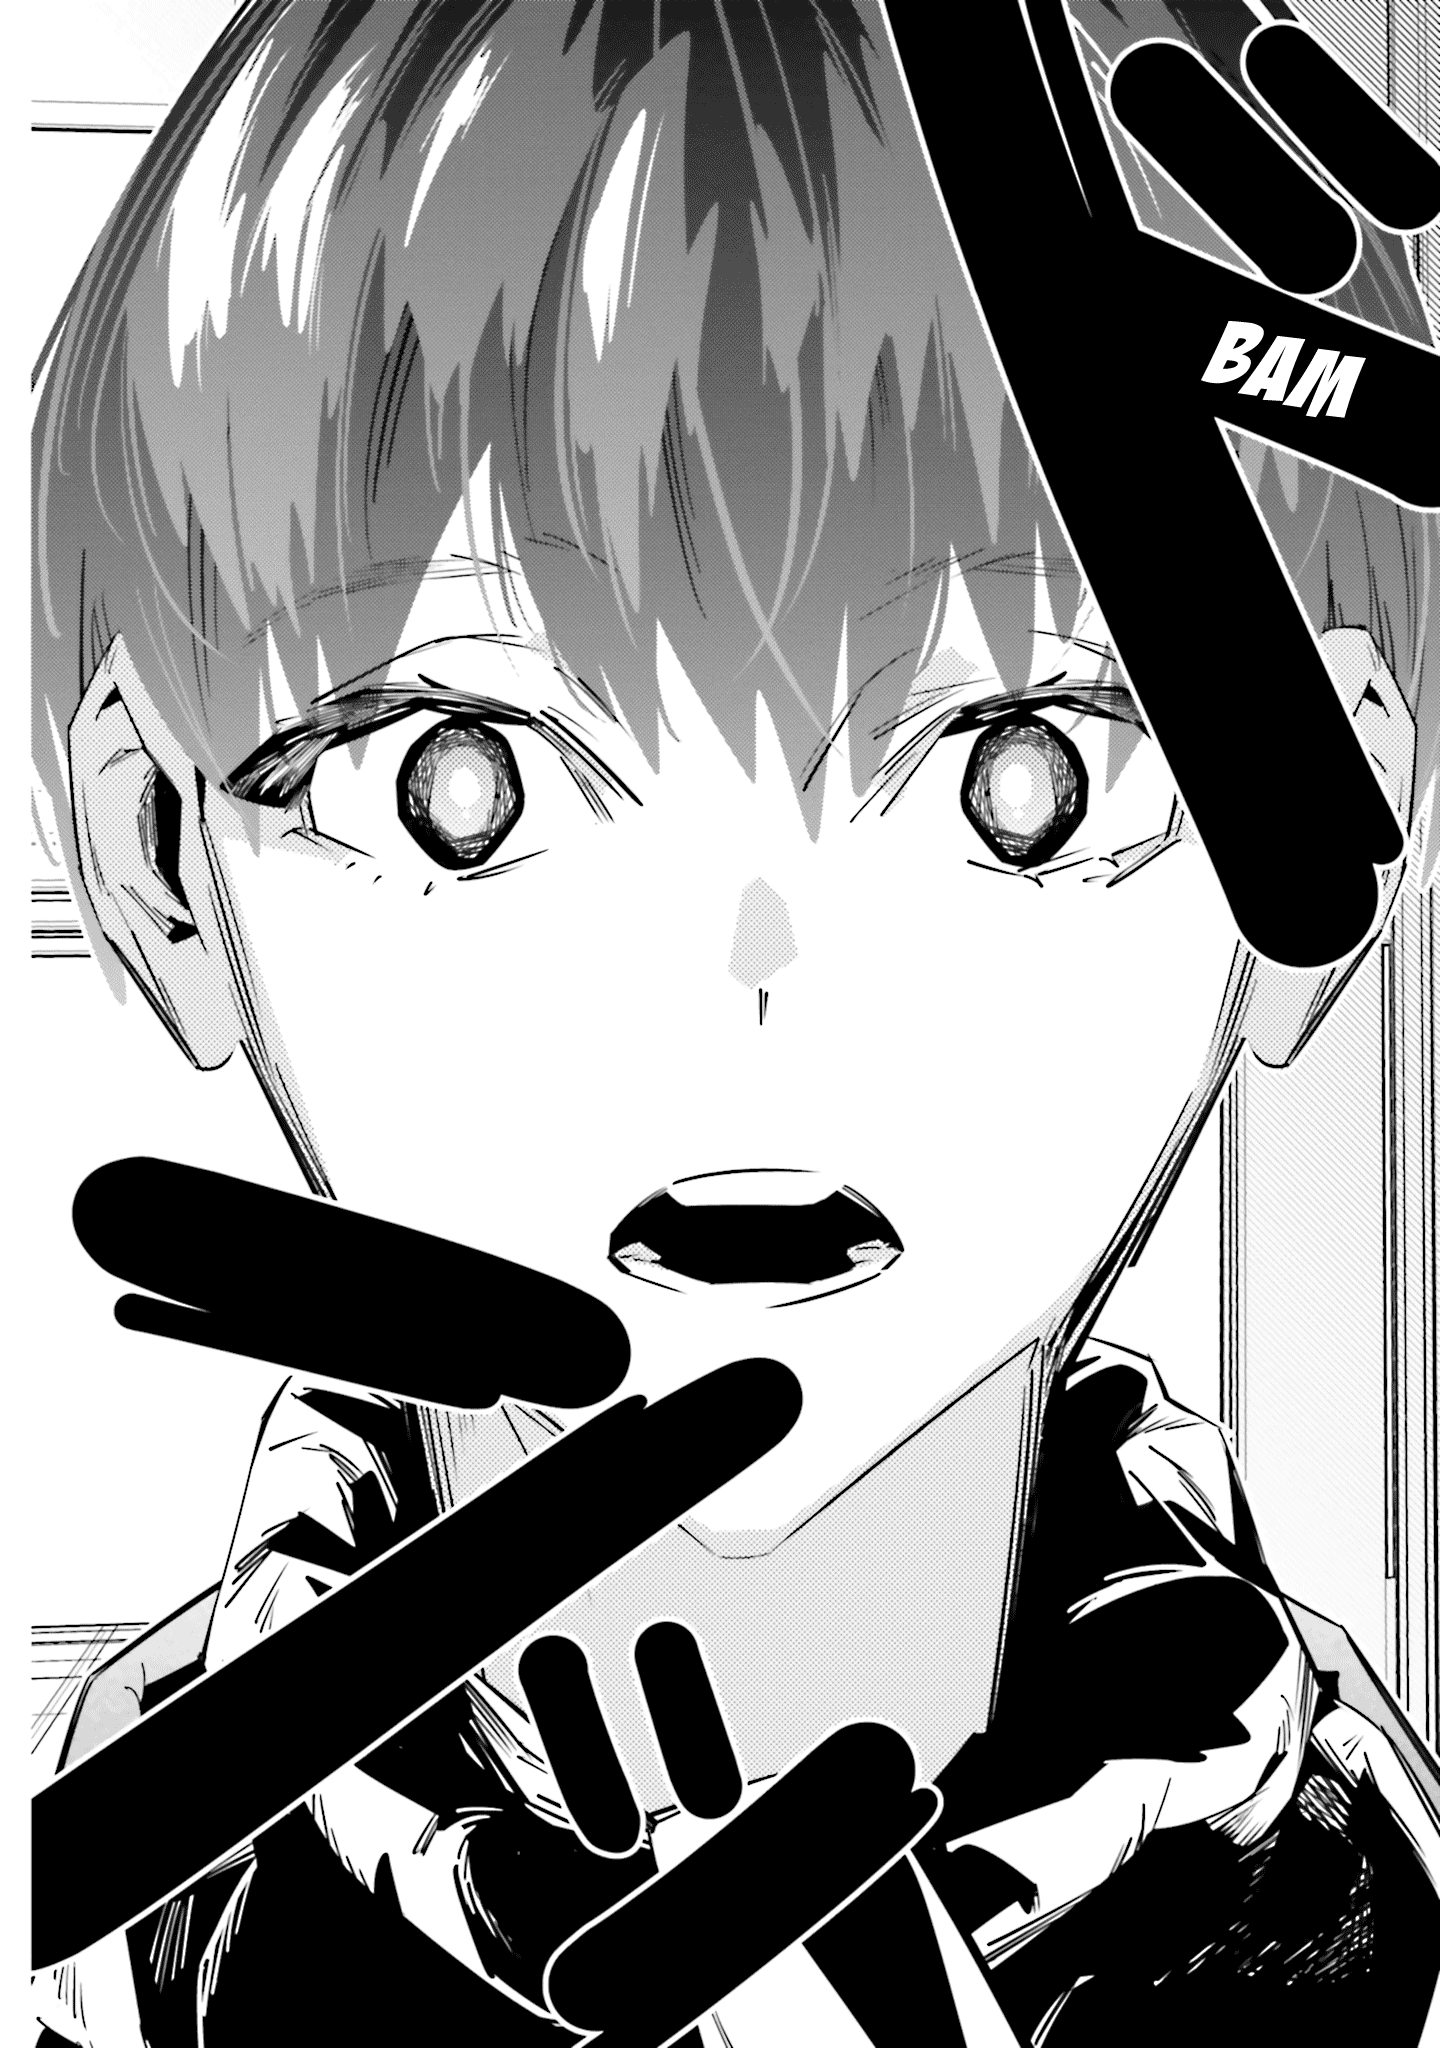 I Reincarnated As The Little Sister Of A Death Game Manga's Murder Mastermind And Failed Chapter 4 #14